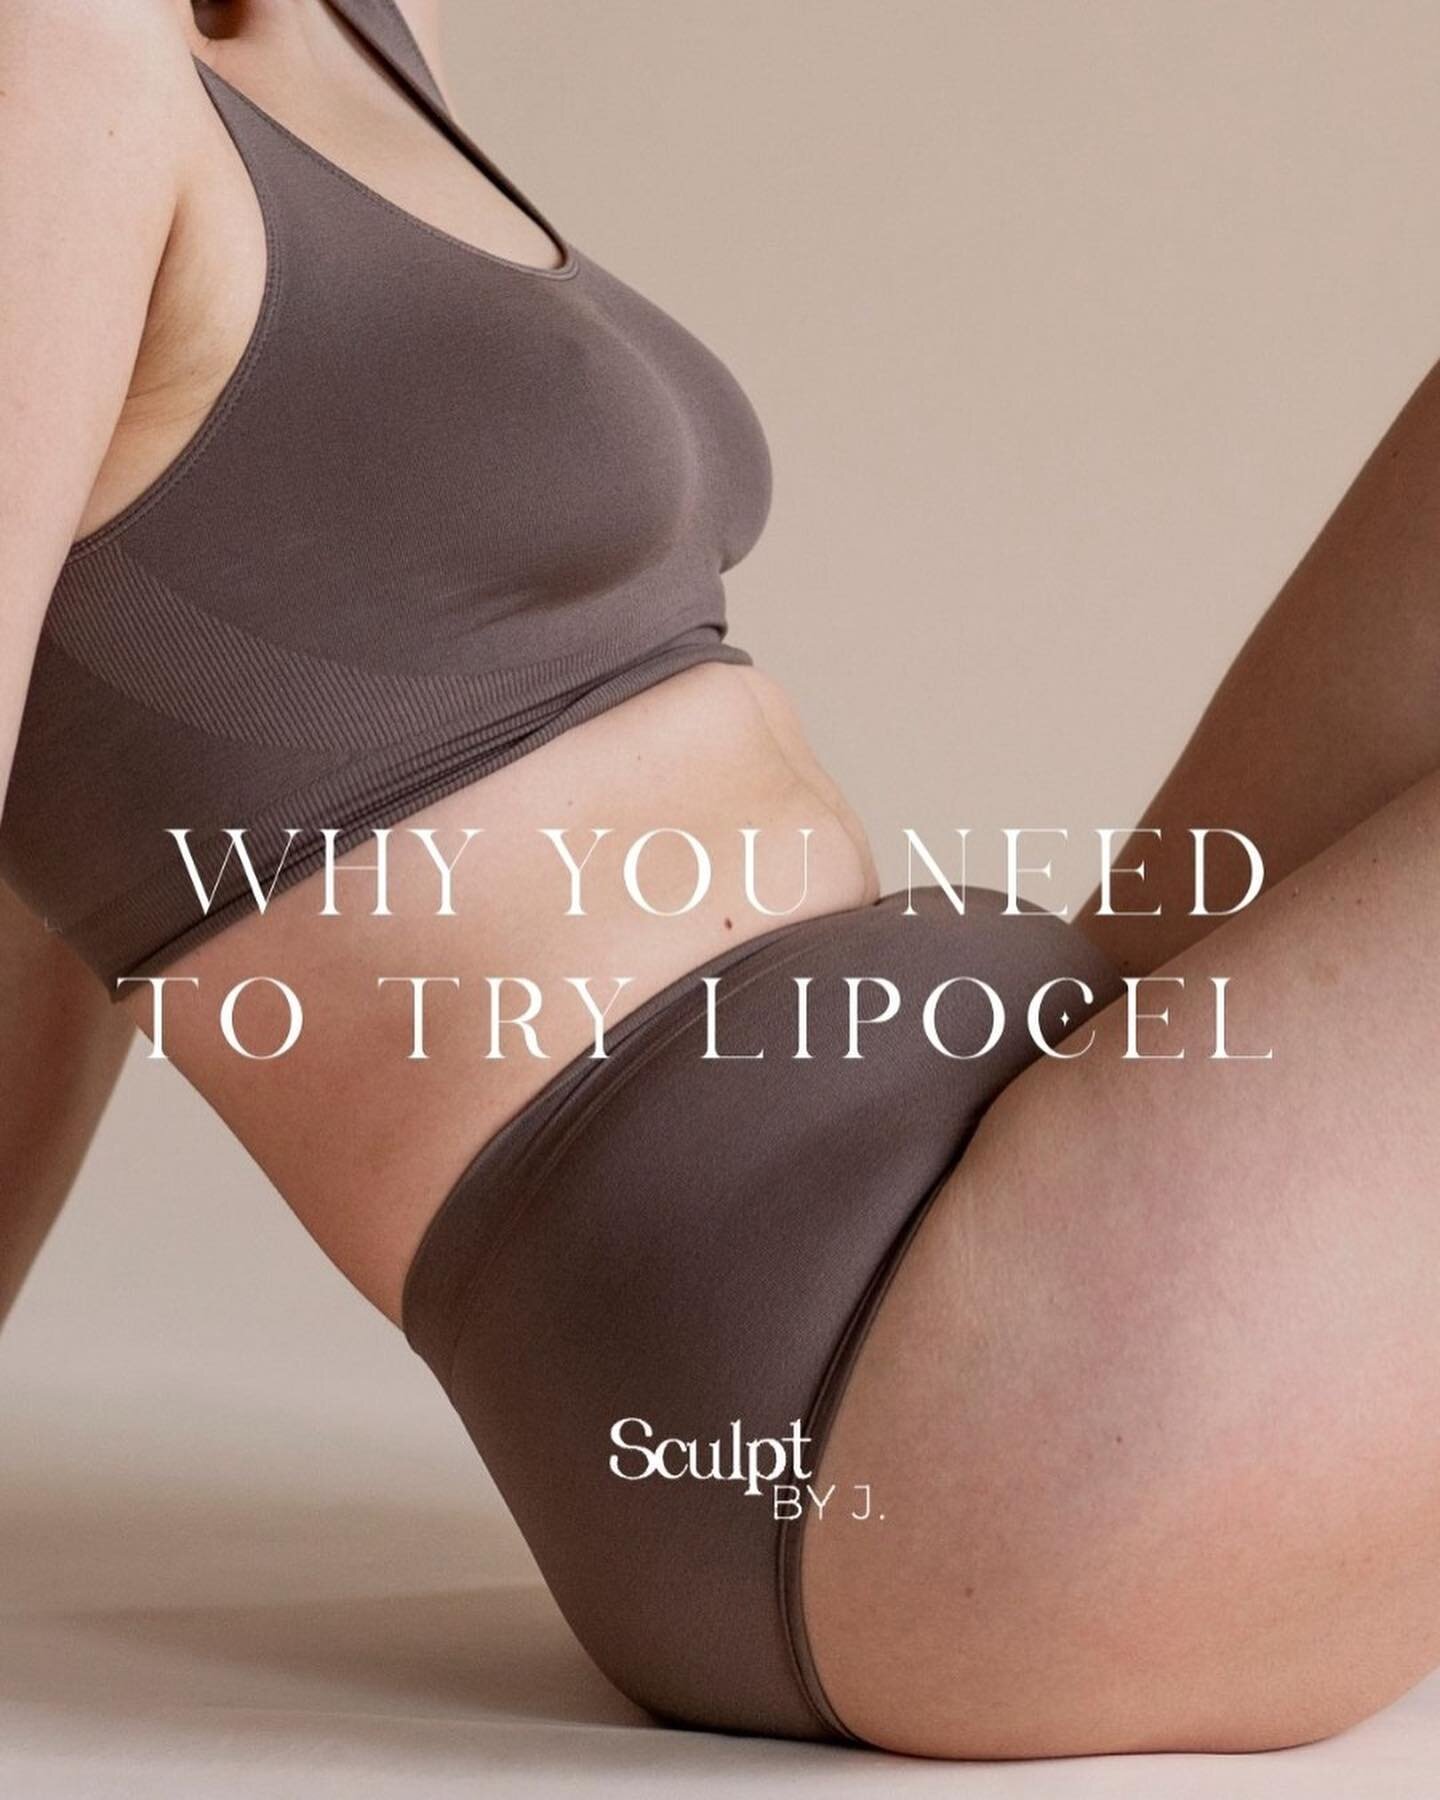 We can&rsquo;t get OVER LIPOcel.

This treatment uses High Intensity Focused Ultrasound (HIFU) to both permanently destroy fat cells and tighten the skin together at the same time.

.
.
.
.
.
#Lipocel
#BodyContouring
#NonSurgicalLiposuction
#BeautyCl